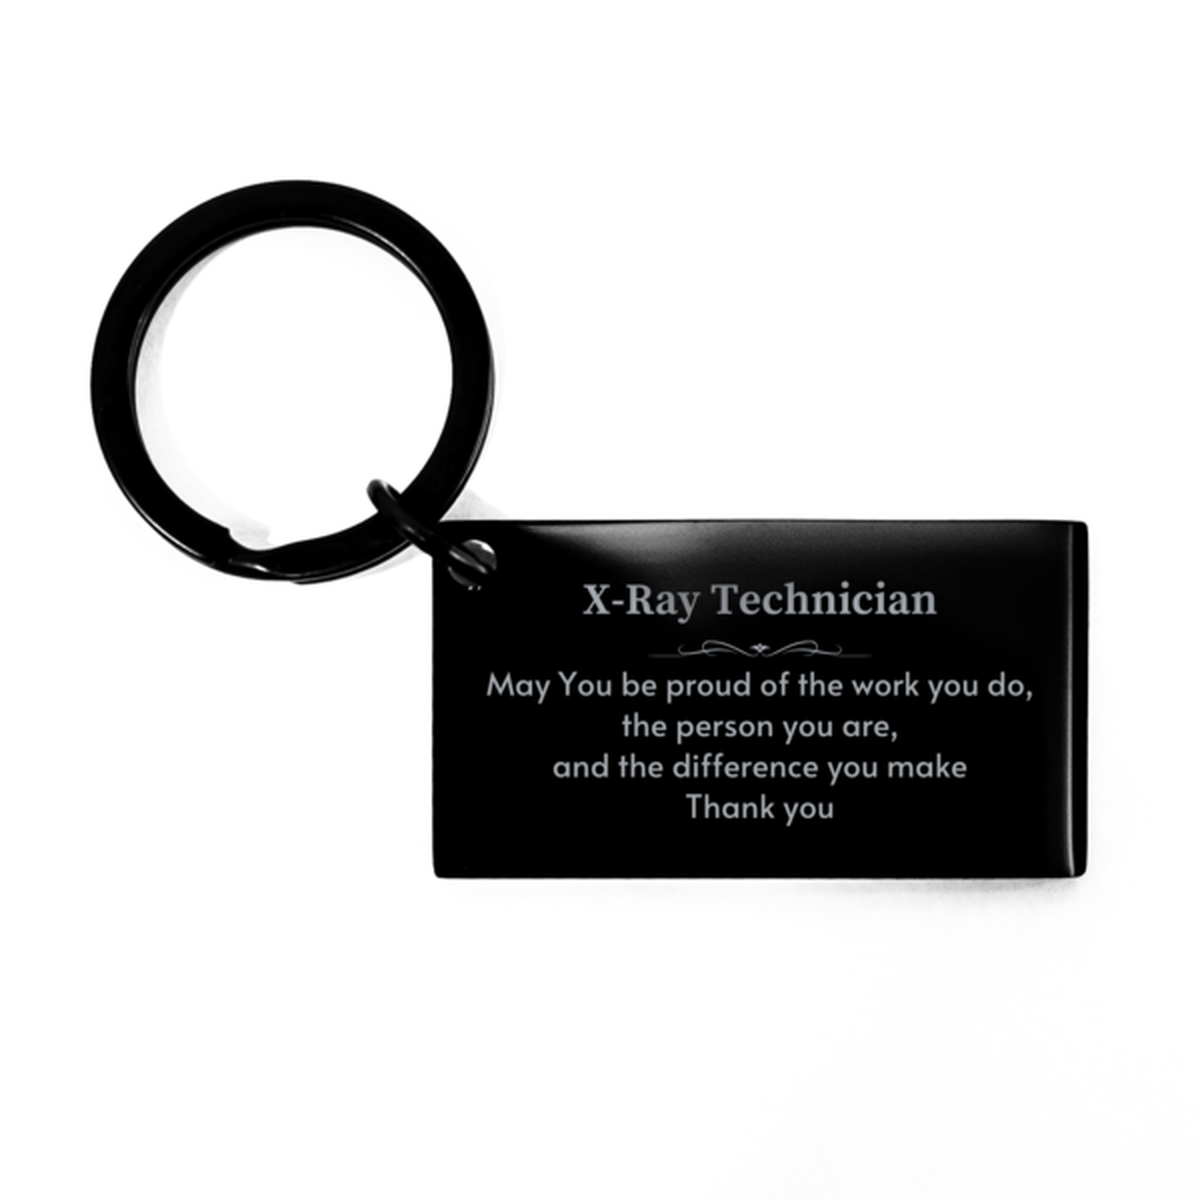 Heartwarming Keychain Retirement Coworkers Gifts for X-Ray Technician, Auditor May You be proud of the work you do, the person you are Gifts for Boss Men Women Friends